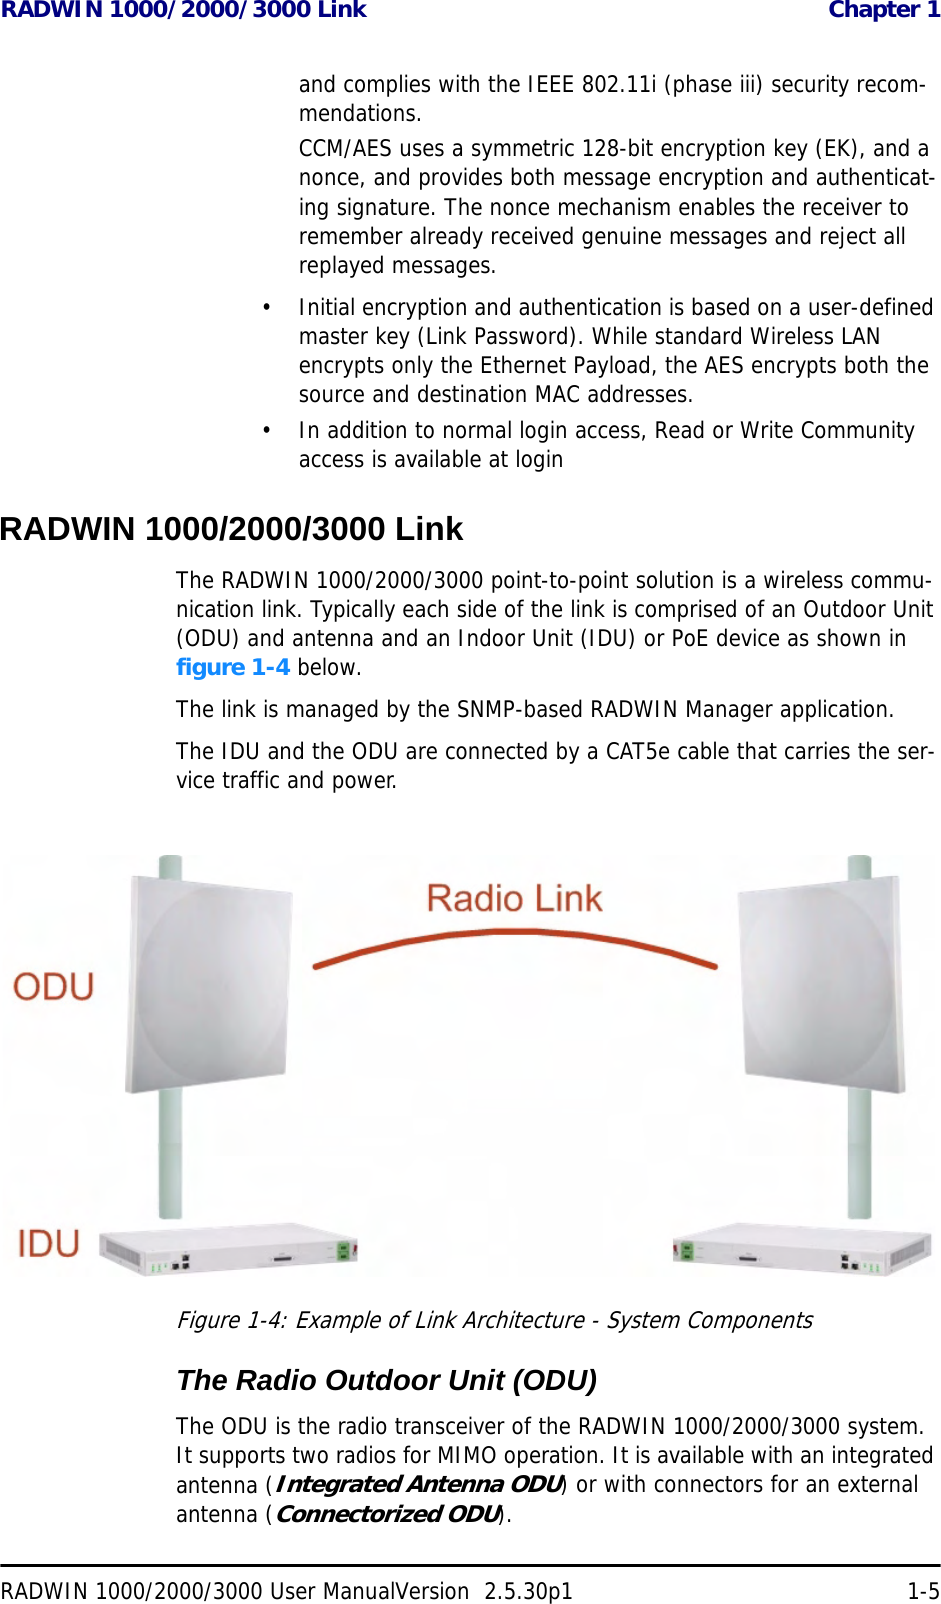 RADWIN 1000/2000/3000 Link  Chapter 1RADWIN 1000/2000/3000 User ManualVersion  2.5.30p1 1-5and complies with the IEEE 802.11i (phase iii) security recom-mendations.CCM/AES uses a symmetric 128-bit encryption key (EK), and a nonce, and provides both message encryption and authenticat-ing signature. The nonce mechanism enables the receiver to remember already received genuine messages and reject all replayed messages.• Initial encryption and authentication is based on a user-defined master key (Link Password). While standard Wireless LAN encrypts only the Ethernet Payload, the AES encrypts both the source and destination MAC addresses.• In addition to normal login access, Read or Write Community access is available at loginRADWIN 1000/2000/3000 LinkThe RADWIN 1000/2000/3000 point-to-point solution is a wireless commu-nication link. Typically each side of the link is comprised of an Outdoor Unit (ODU) and antenna and an Indoor Unit (IDU) or PoE device as shown in figure 1-4 below.The link is managed by the SNMP-based RADWIN Manager application.The IDU and the ODU are connected by a CAT5e cable that carries the ser-vice traffic and power. Figure 1-4: Example of Link Architecture - System ComponentsThe Radio Outdoor Unit (ODU)The ODU is the radio transceiver of the RADWIN 1000/2000/3000 system. It supports two radios for MIMO operation. It is available with an integrated antenna (Integrated Antenna ODU) or with connectors for an external antenna (Connectorized ODU).